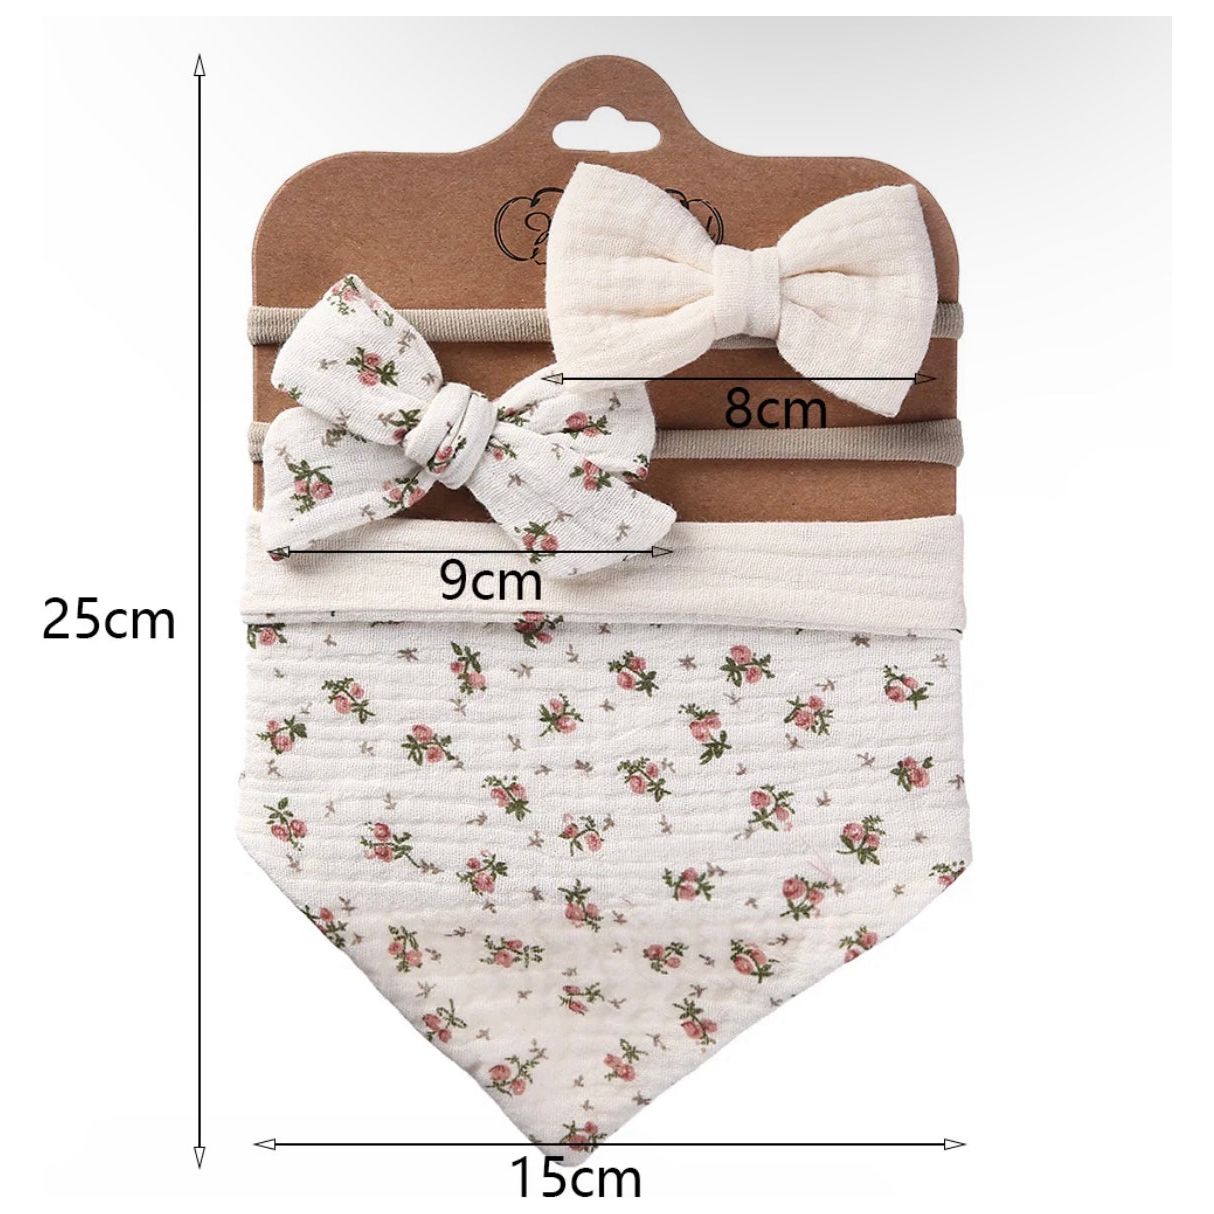 Pibi Infants 100% Wrinkled Burp Cloth+ 2 Bow Hairband Assorted Dp069 Assorted Age- Newborn & Above